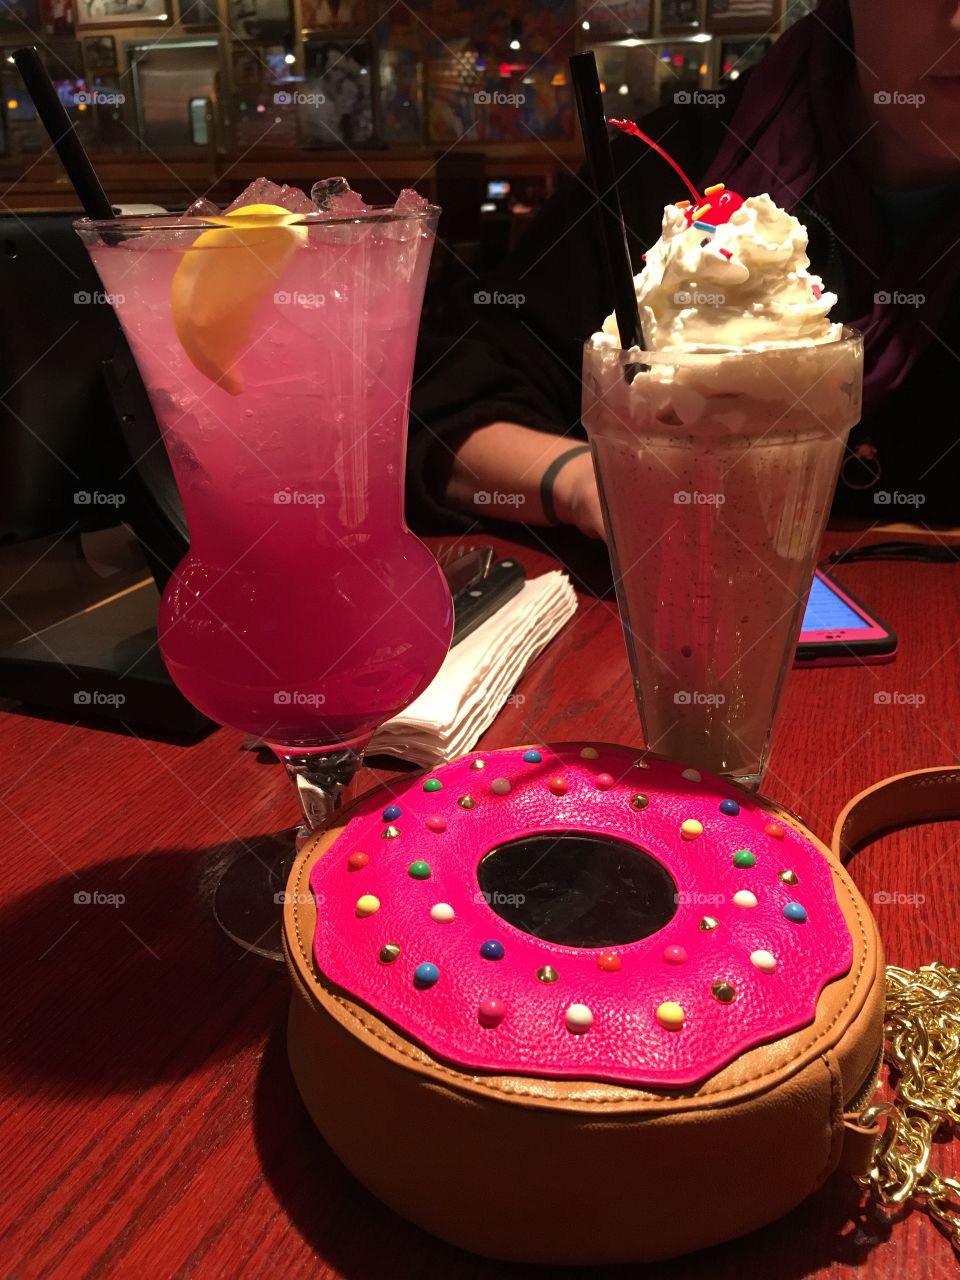 Lovely looking drinks and a kitschy Betsey Johnson handbag 